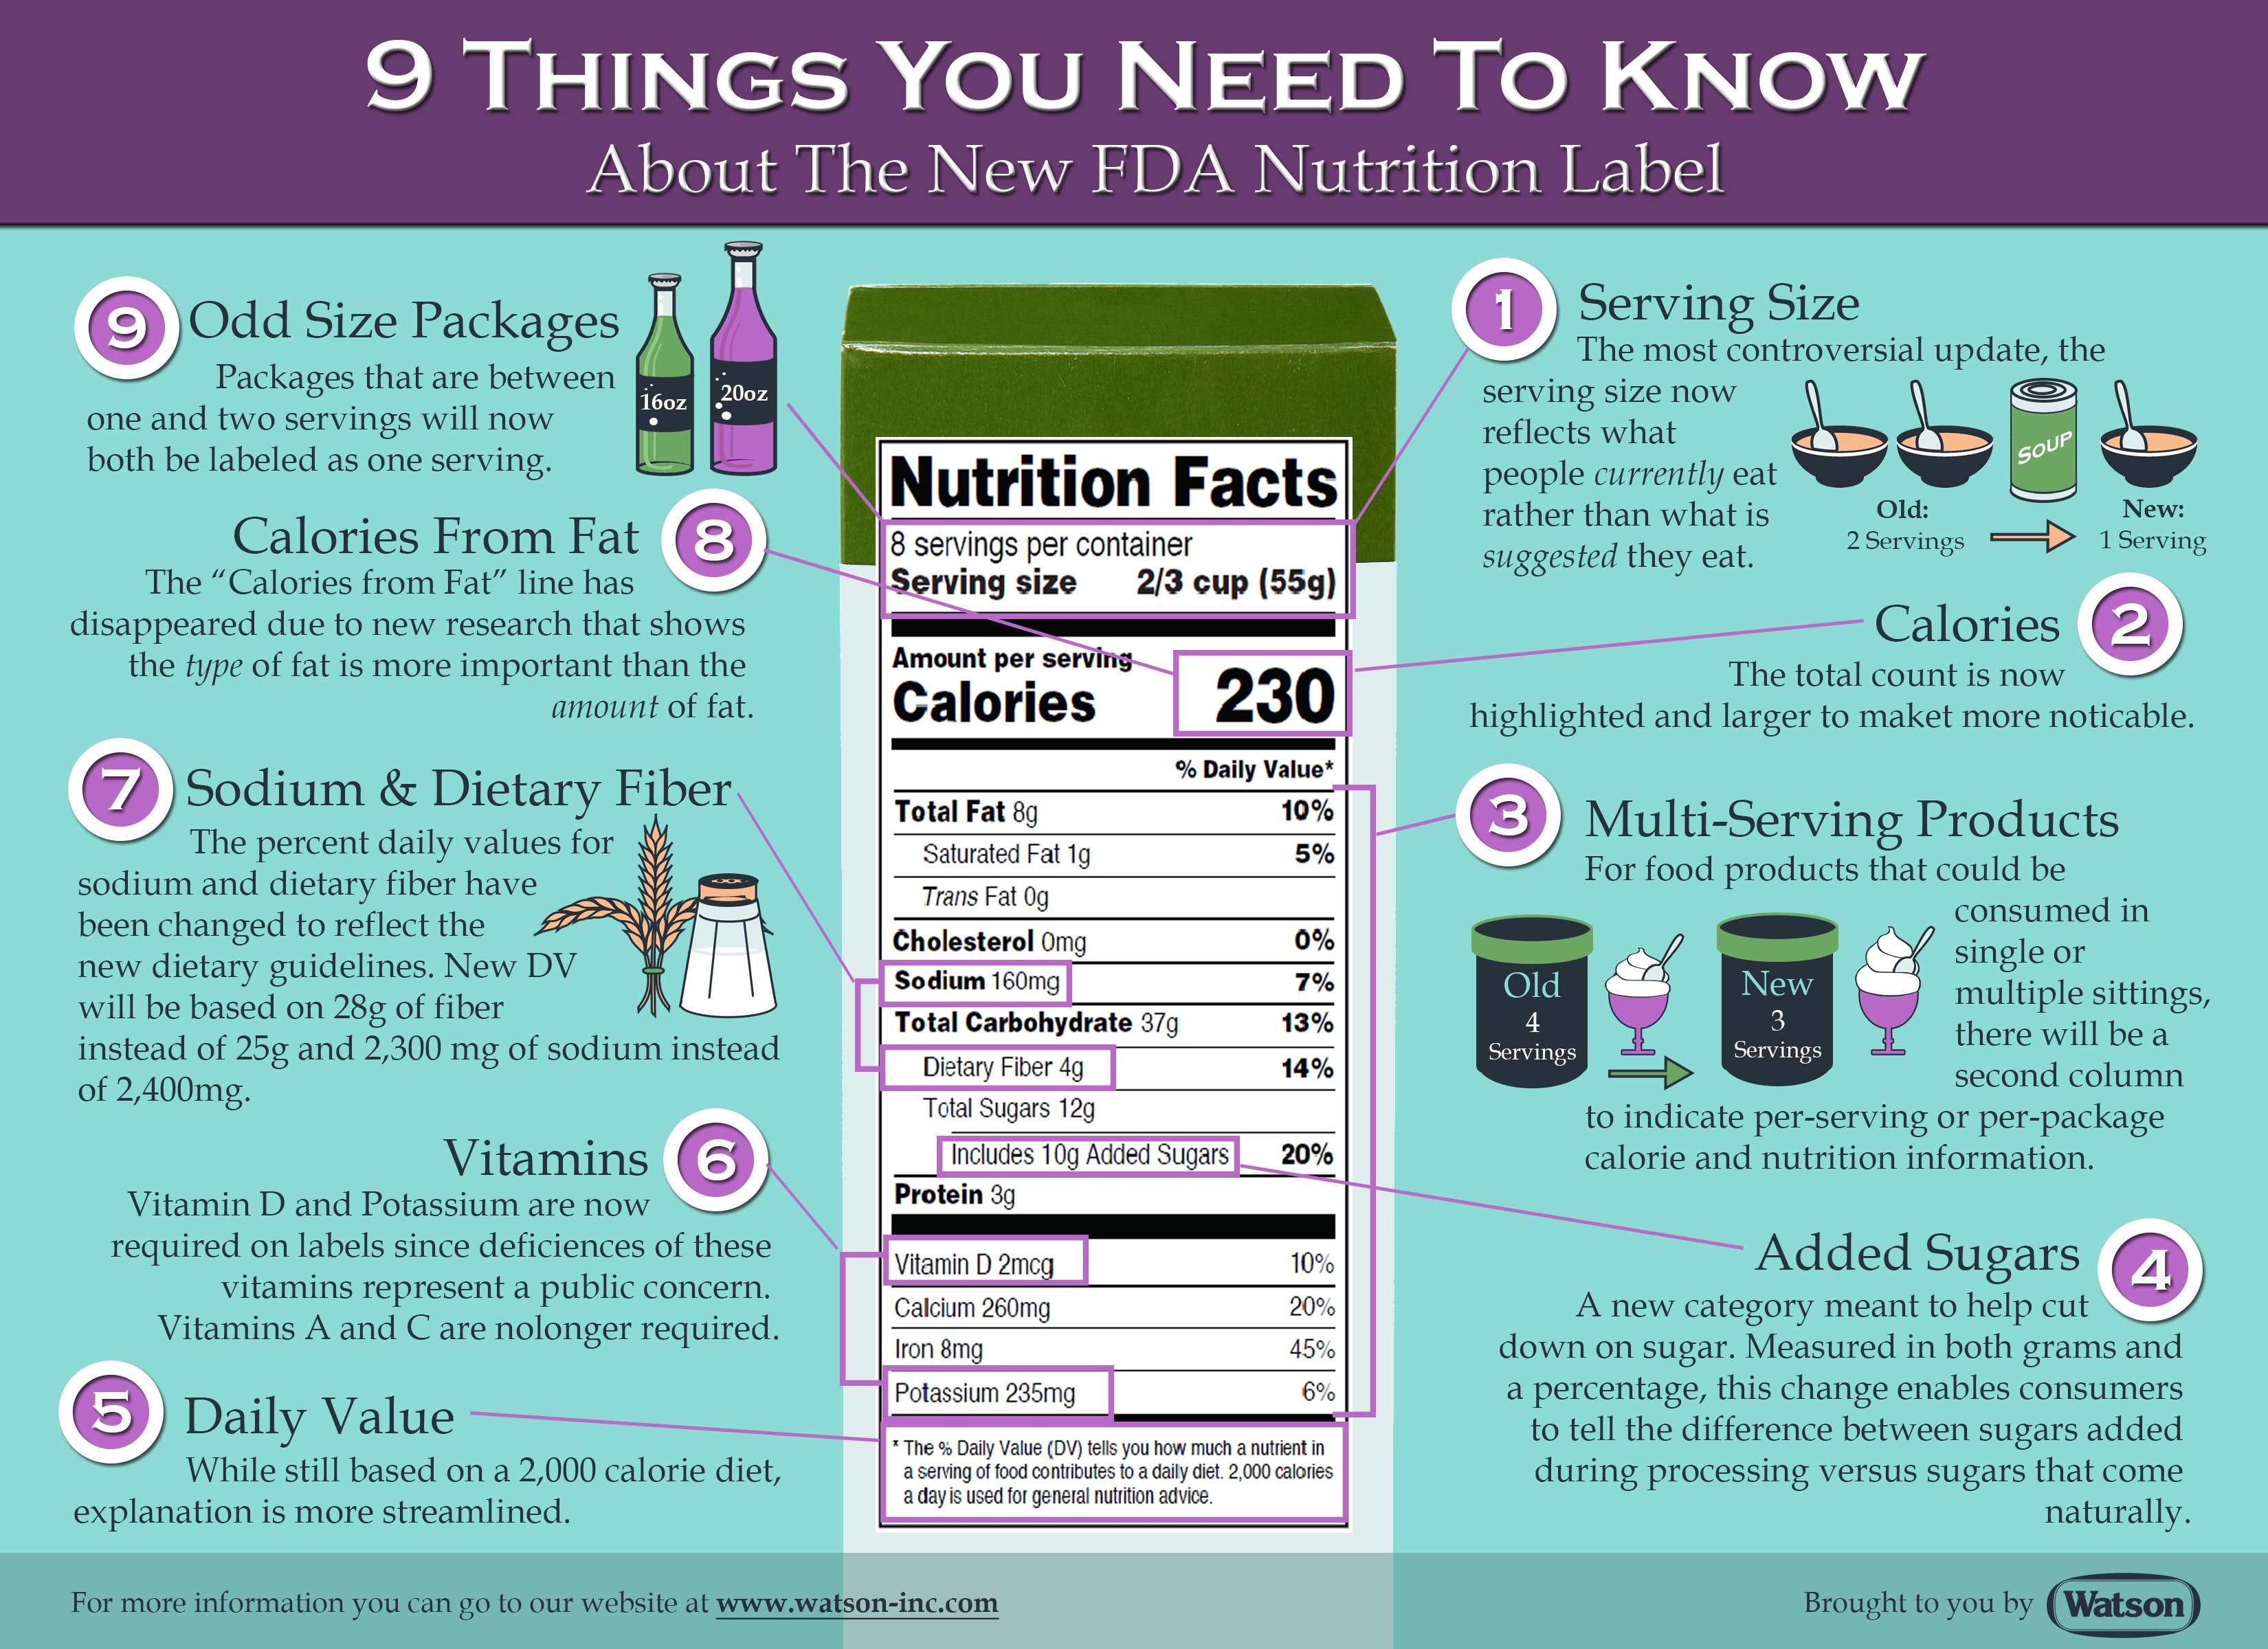 New Nutrition Facts Label | Watson Inc.